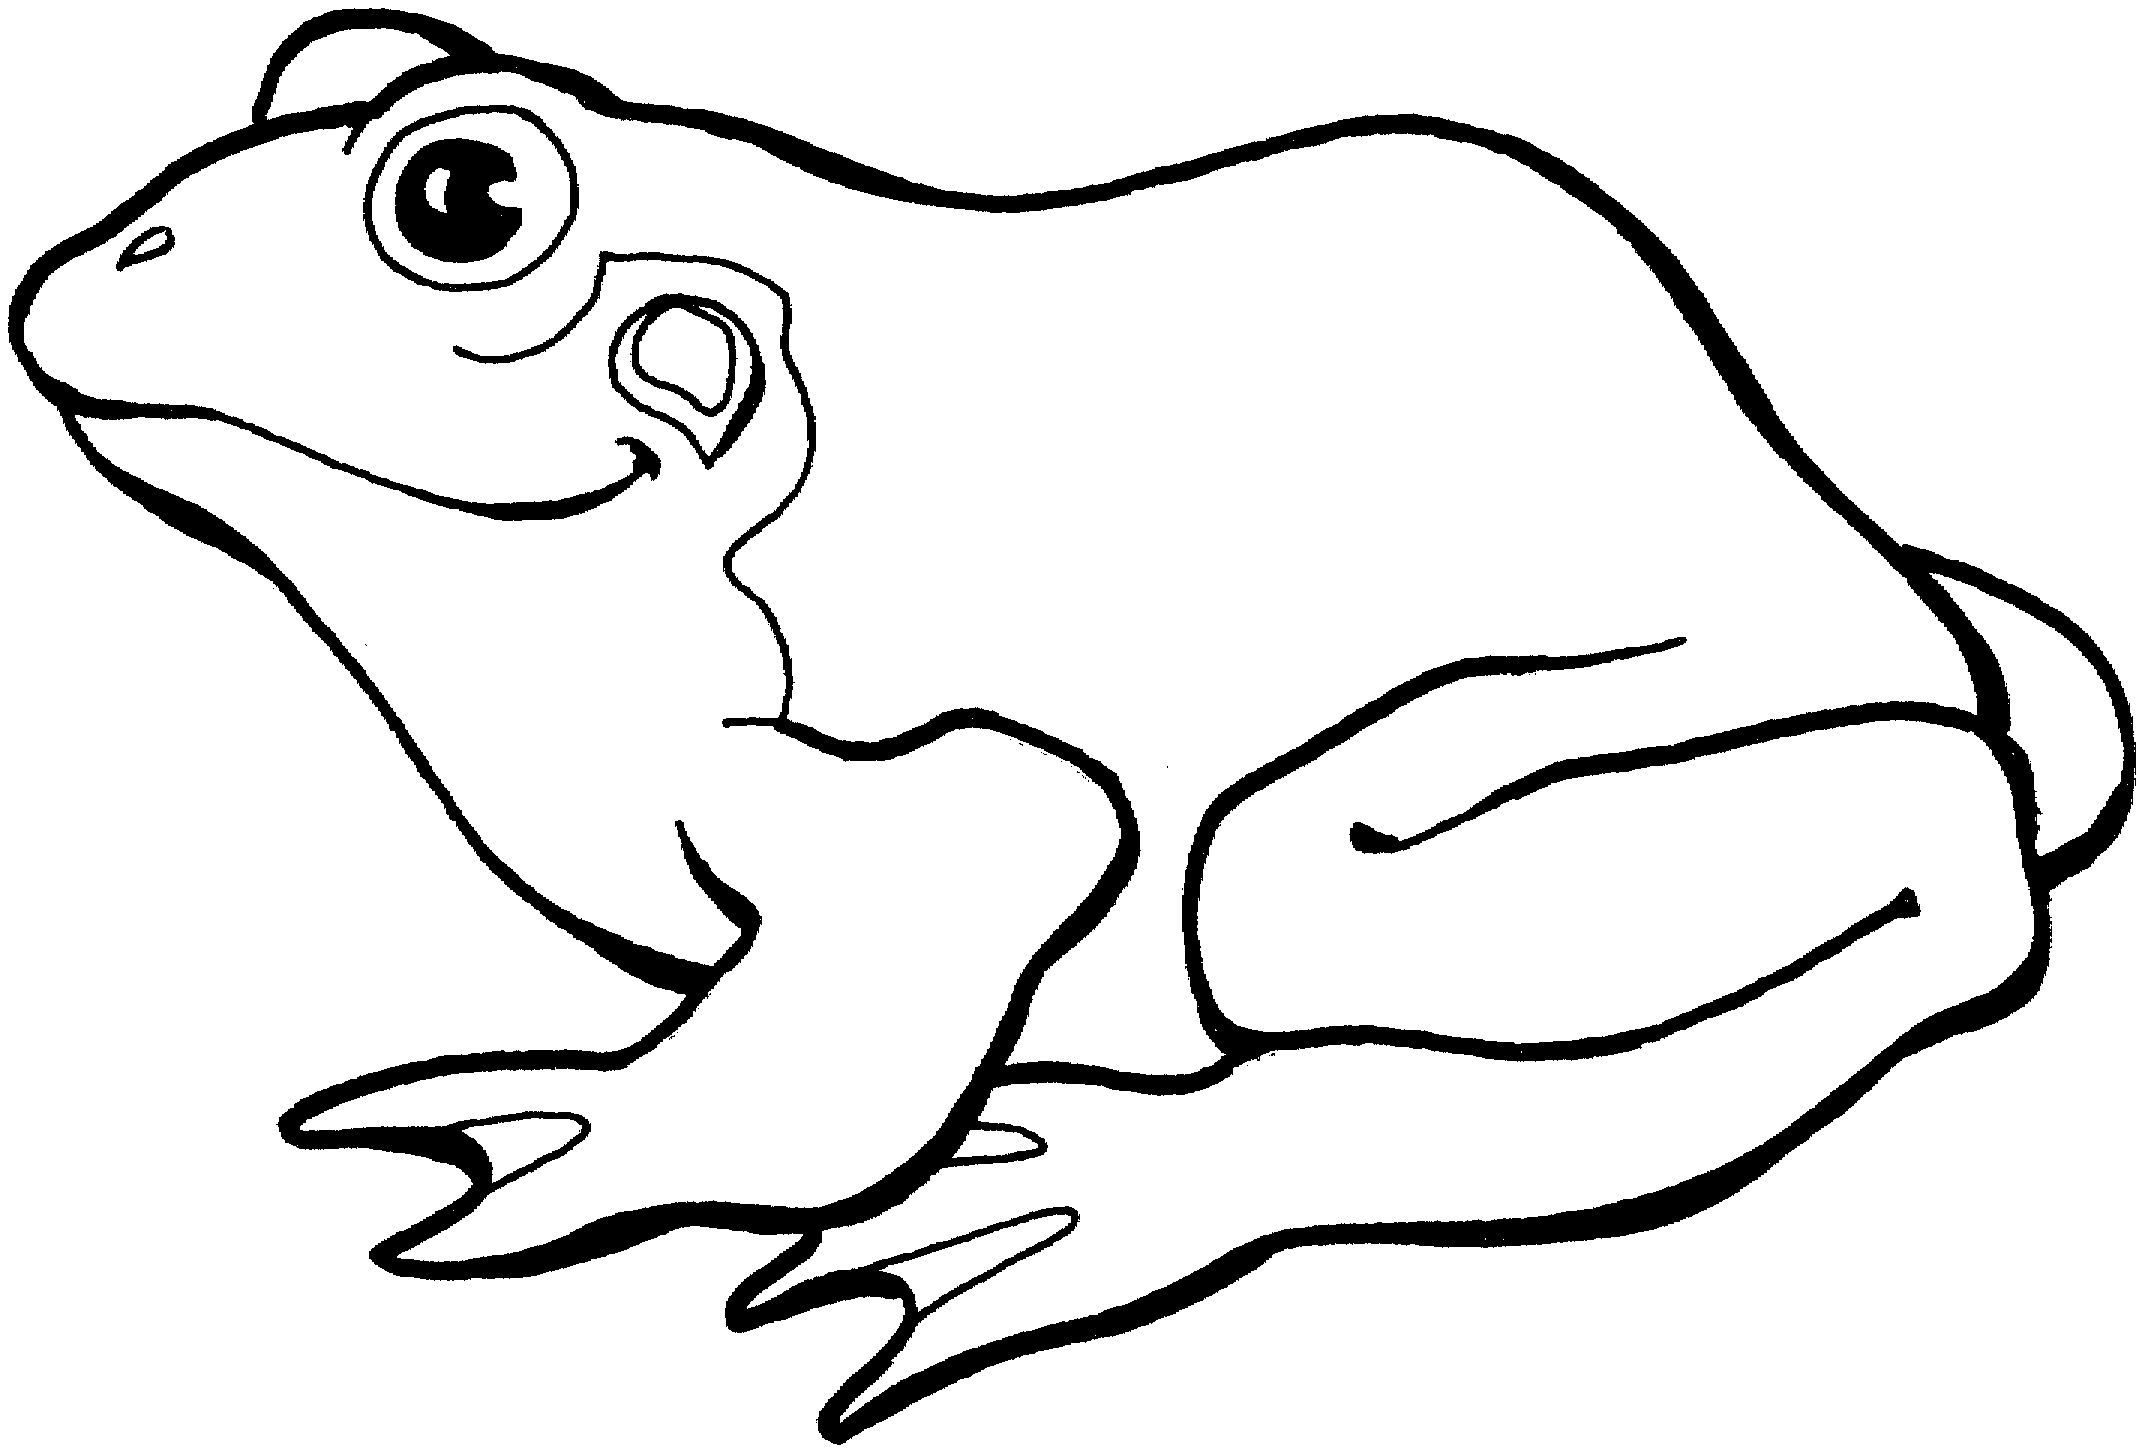 toad pictures to print toad coloring pages getcoloringpagescom pictures print toad to 